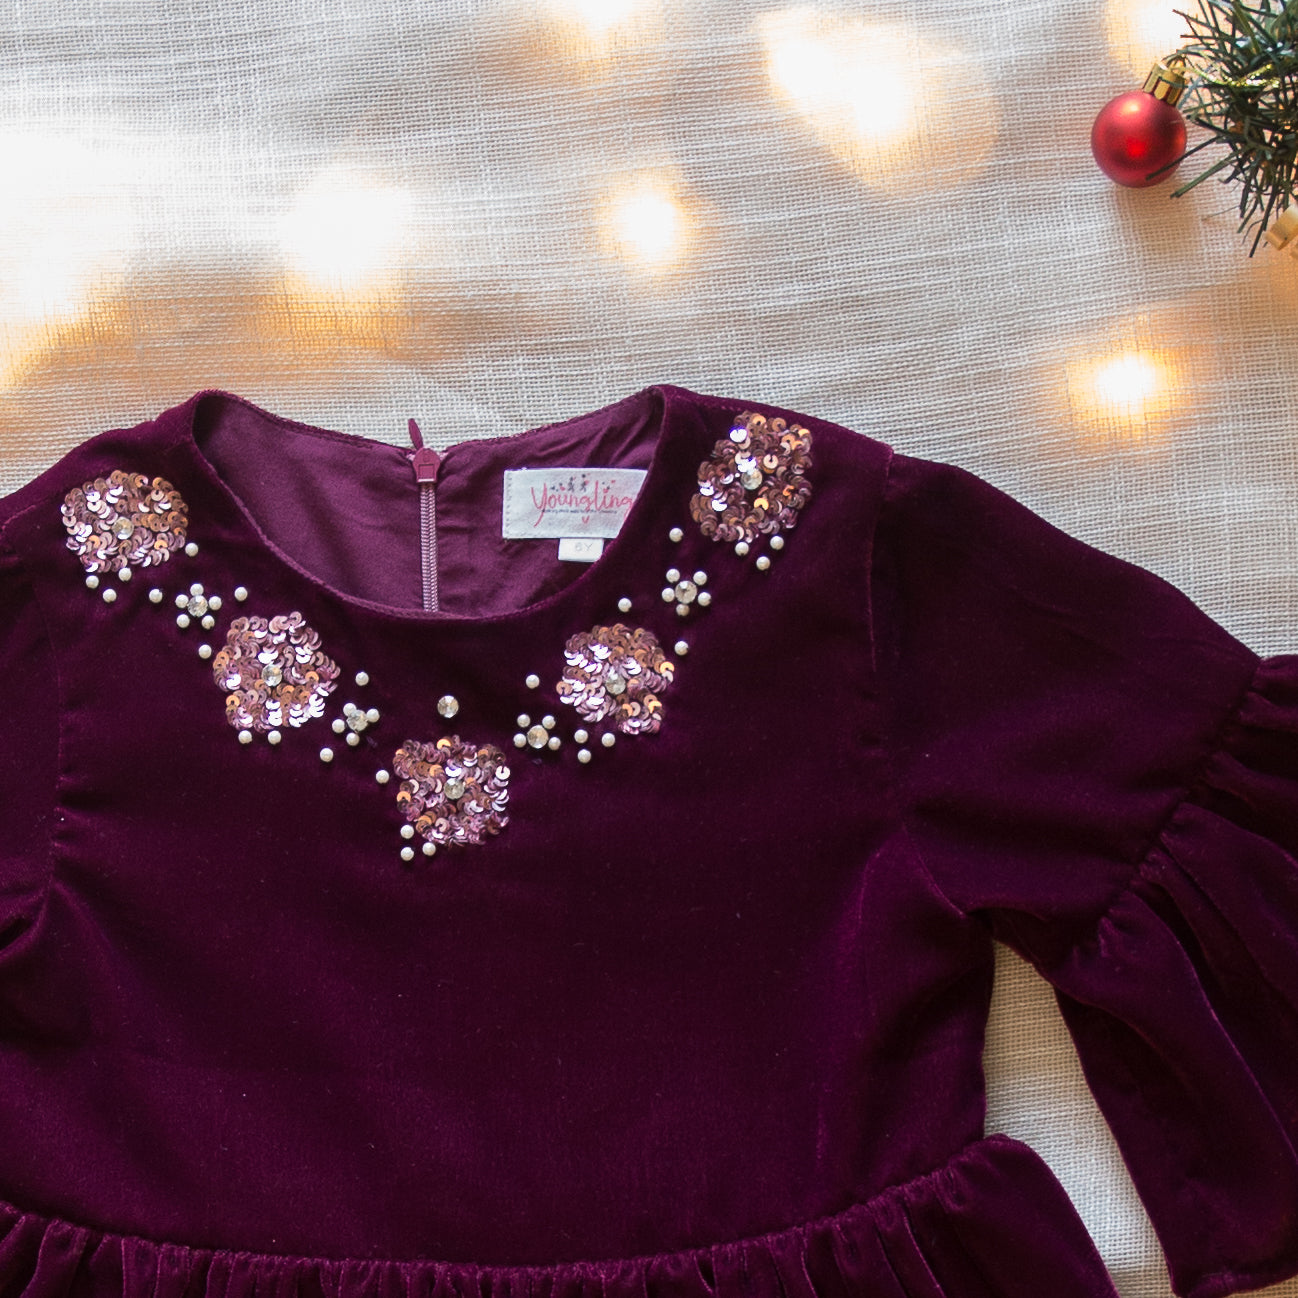 EMBELLISHED PLUM VELVET DRESS WITH BELL SLEEVES             (LEAD TIME 10-15 DAYS)